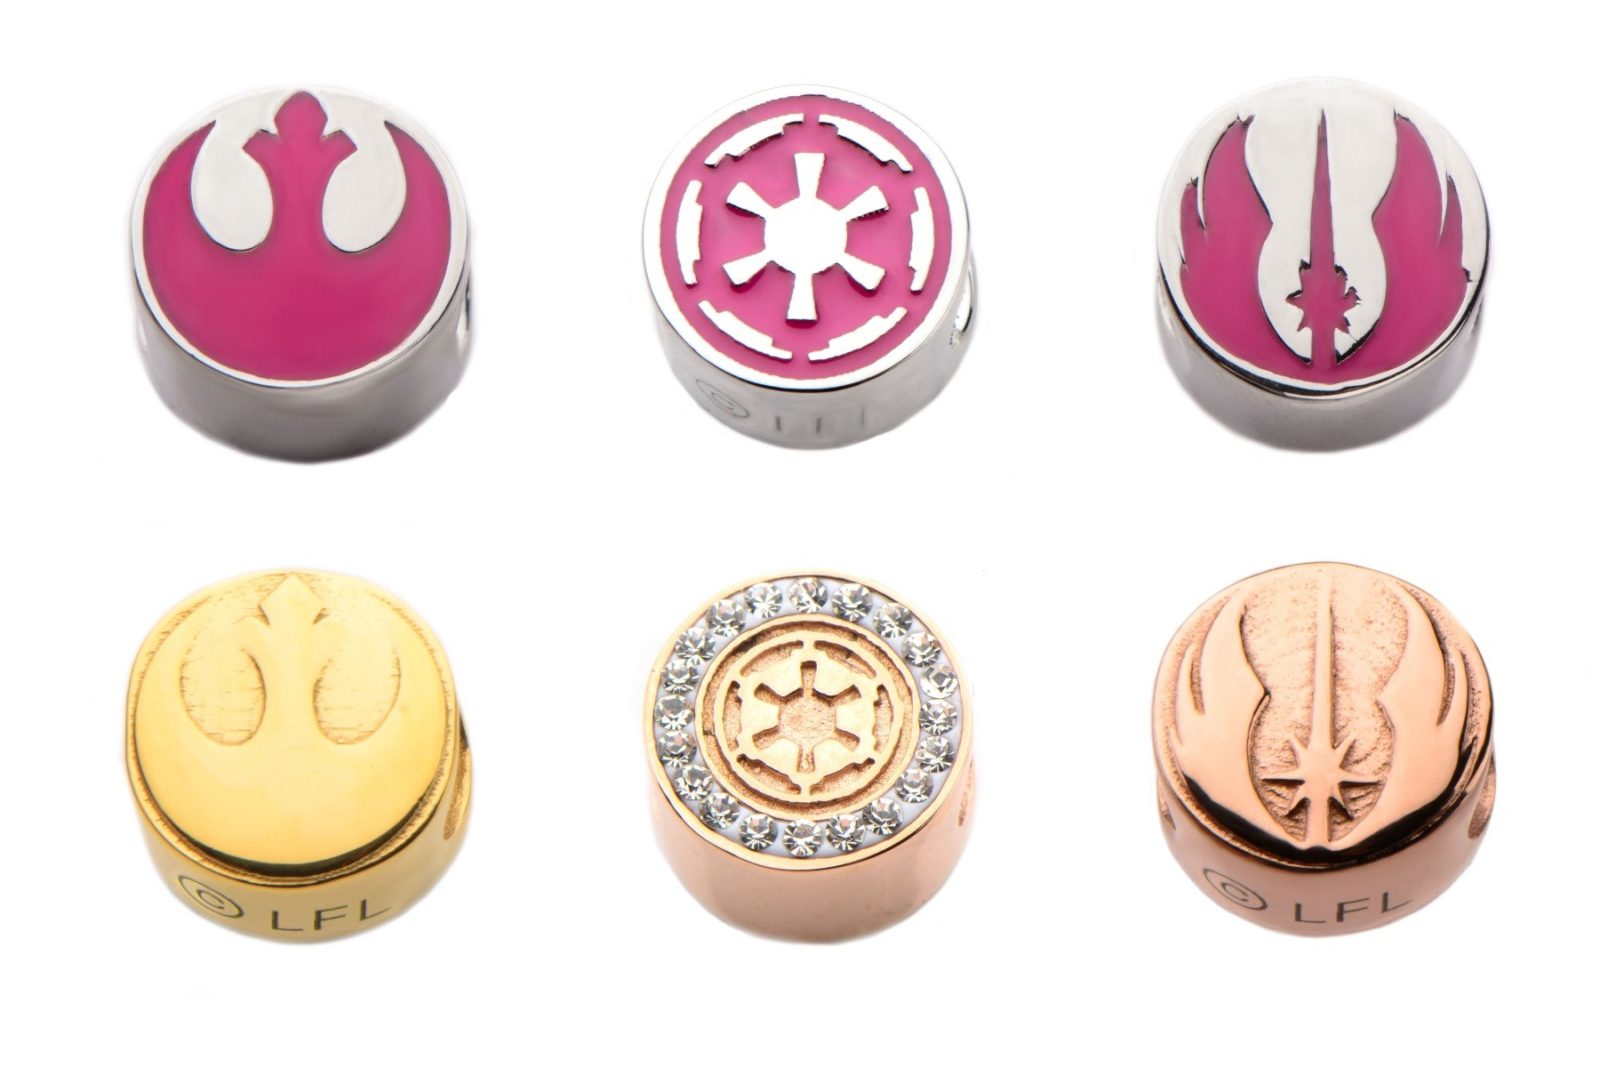 New Star Wars jewelry from Body Vibe